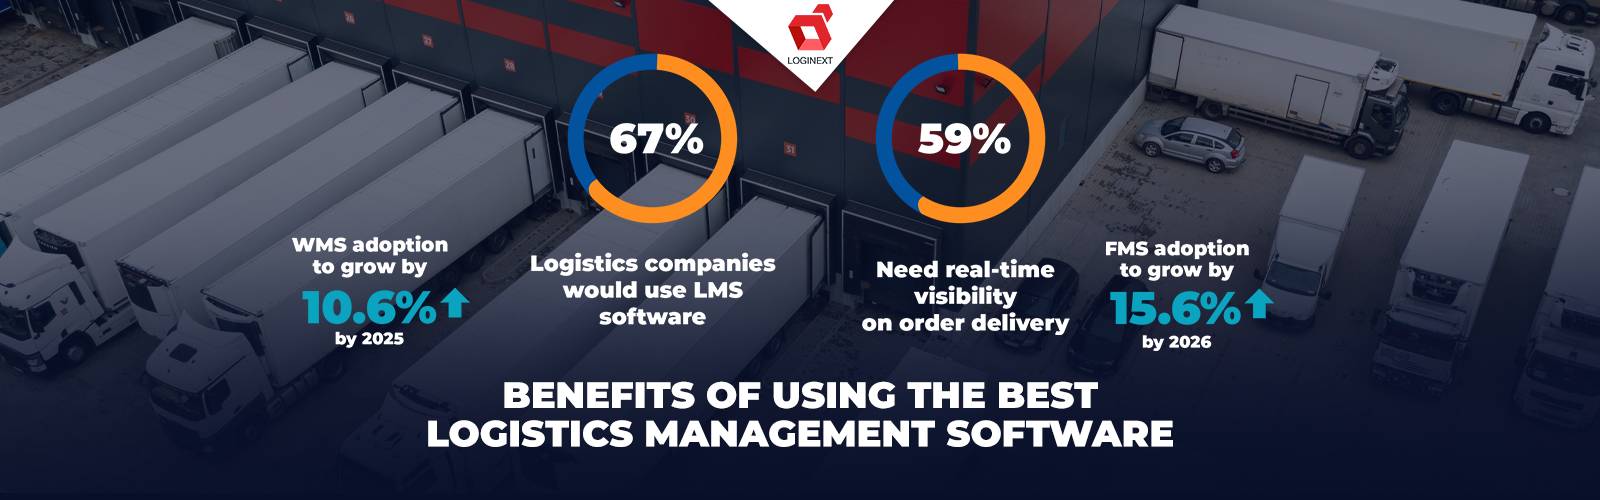 Benefits of using the best logistics management software